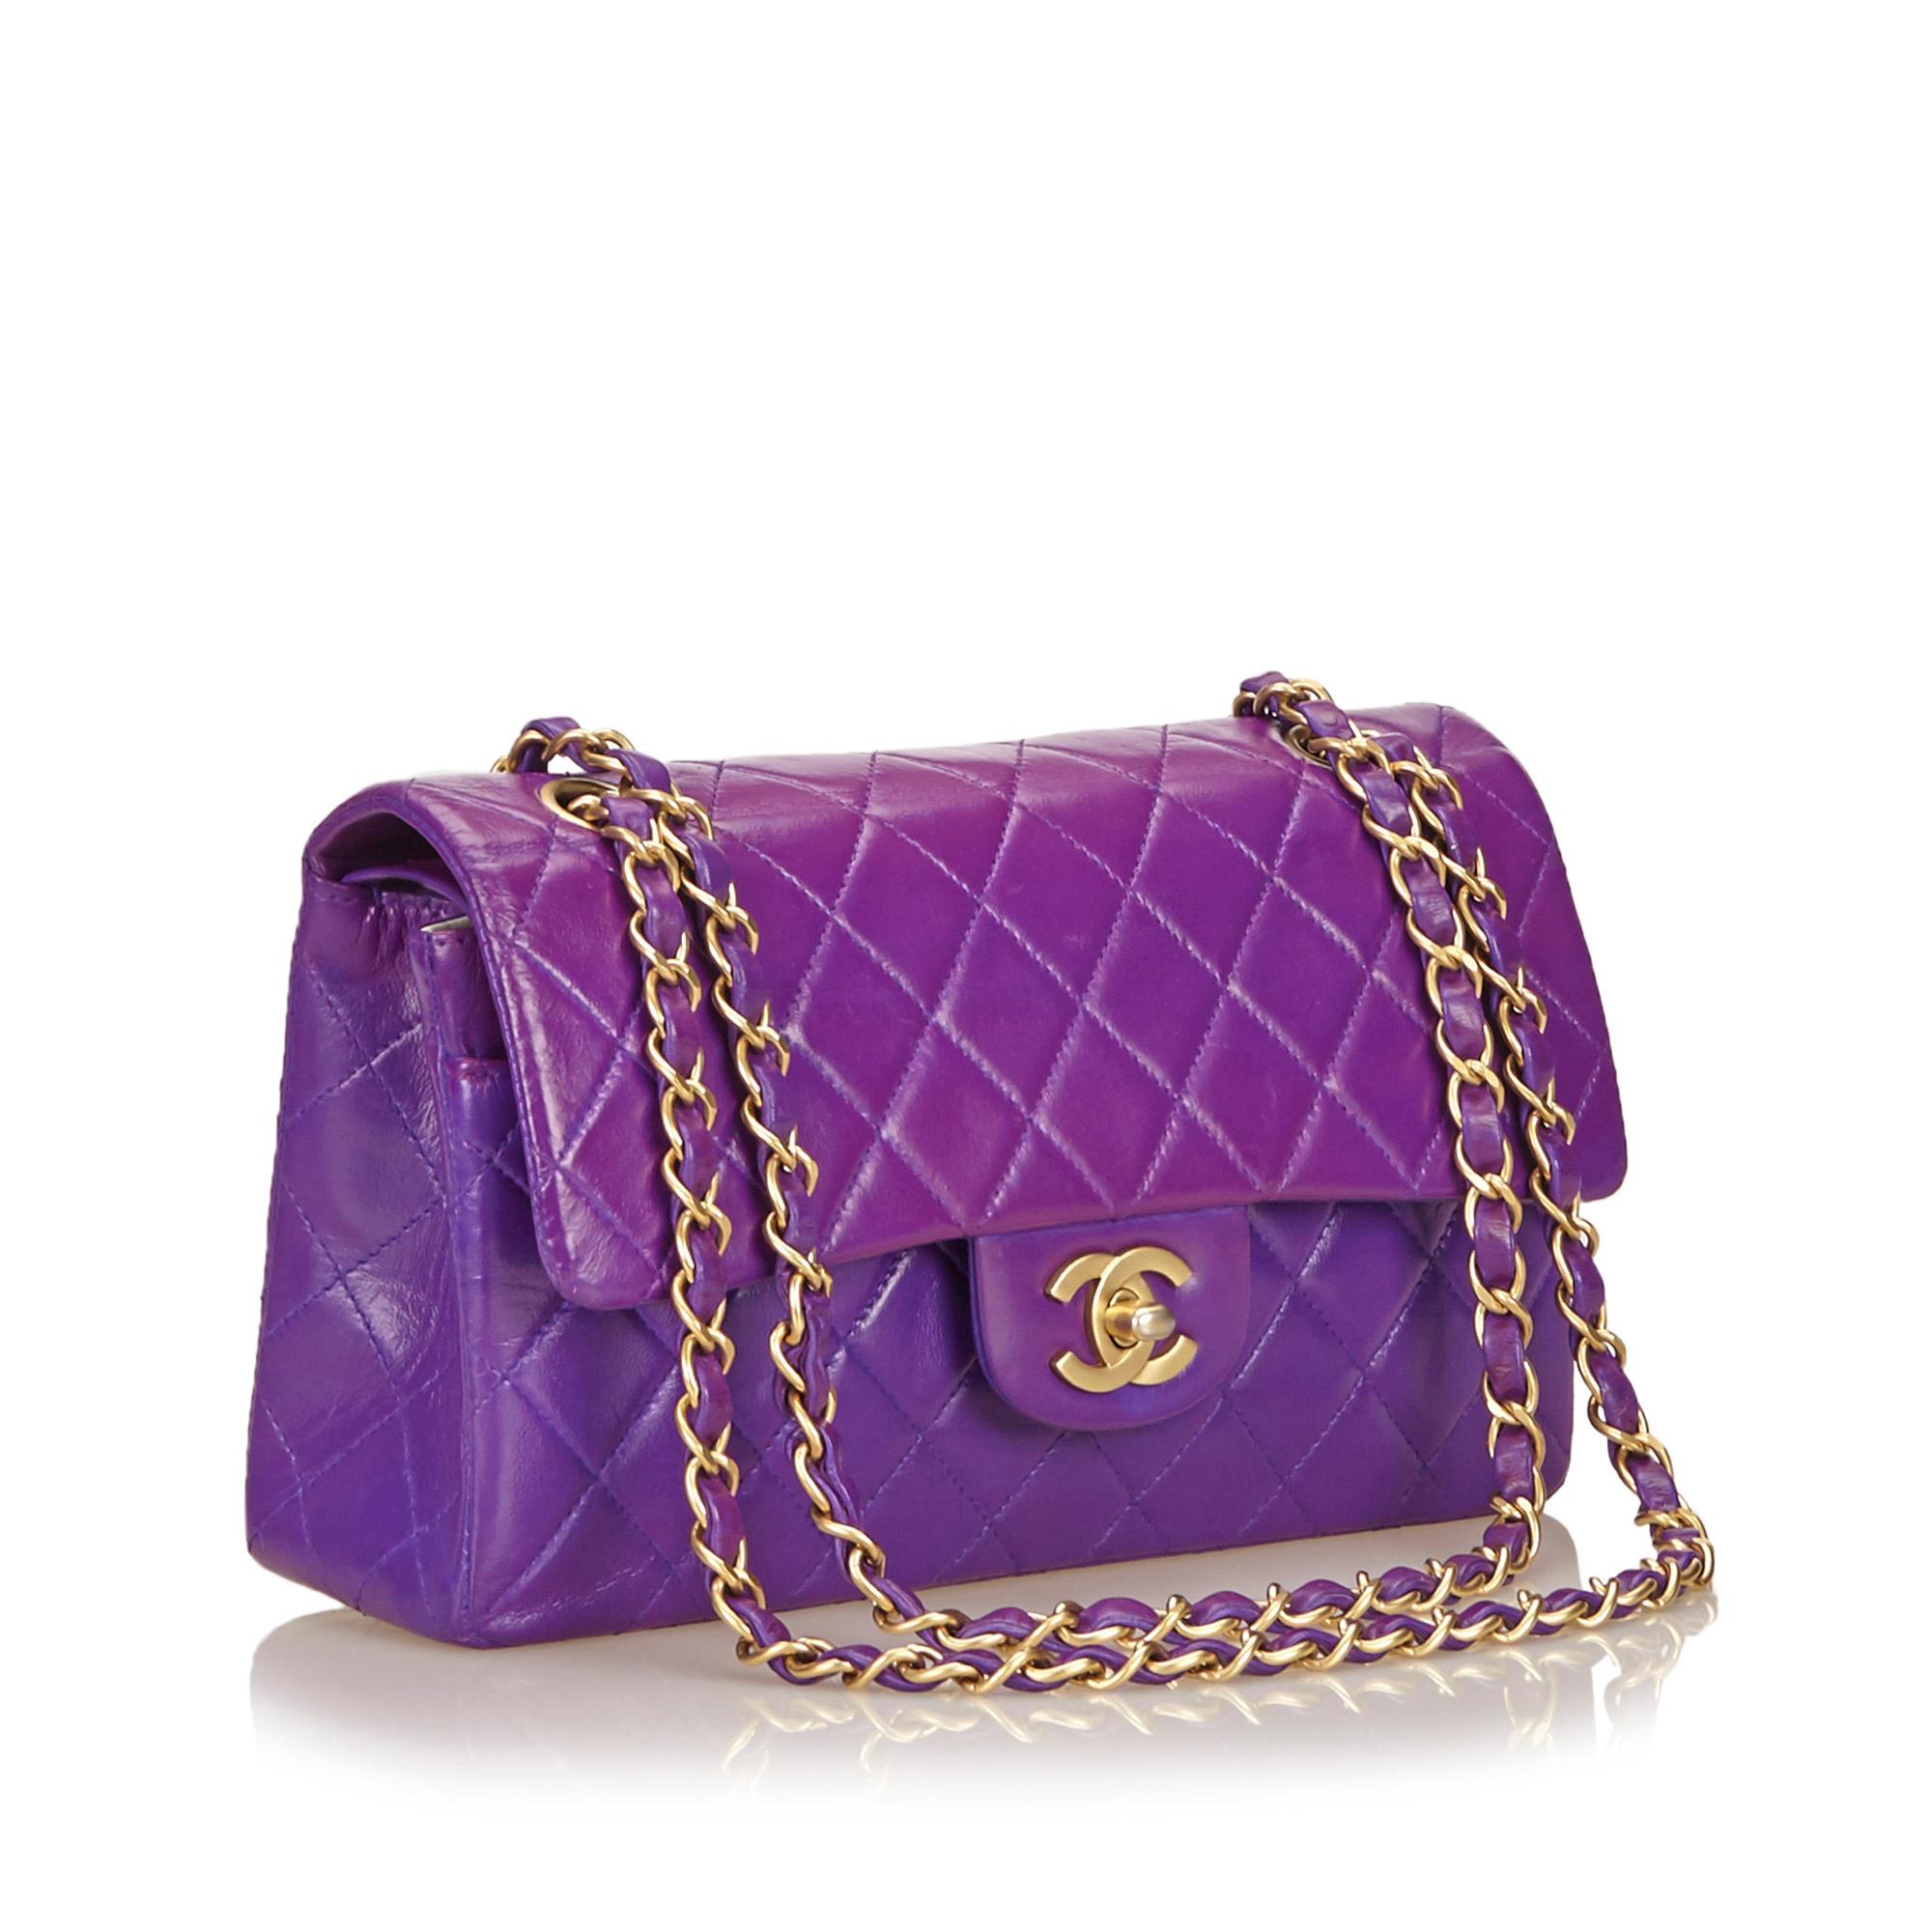 This Chanel Classic Double Flap in purple features a quilted lambskin leather body, gold-tone hardware, chain shoulder straps, an exterior back slip pocket, double front flaps with interlocking Cs and a twist-lock closure, and interior open